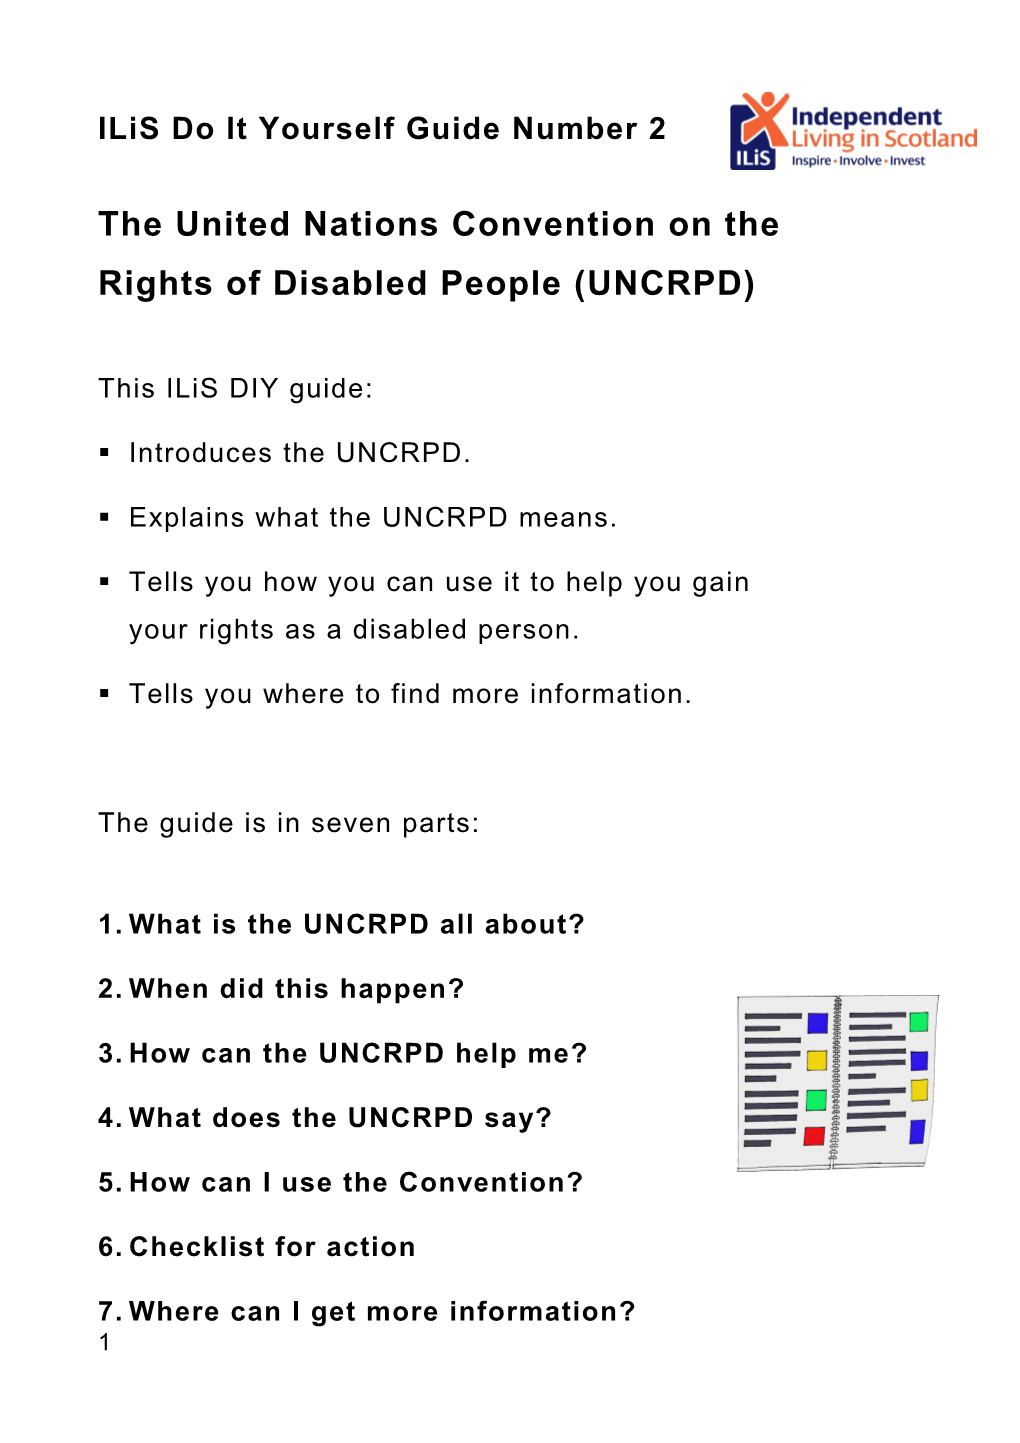 The United Nations Convention on the Rights of Disabled People (UNCRPD)